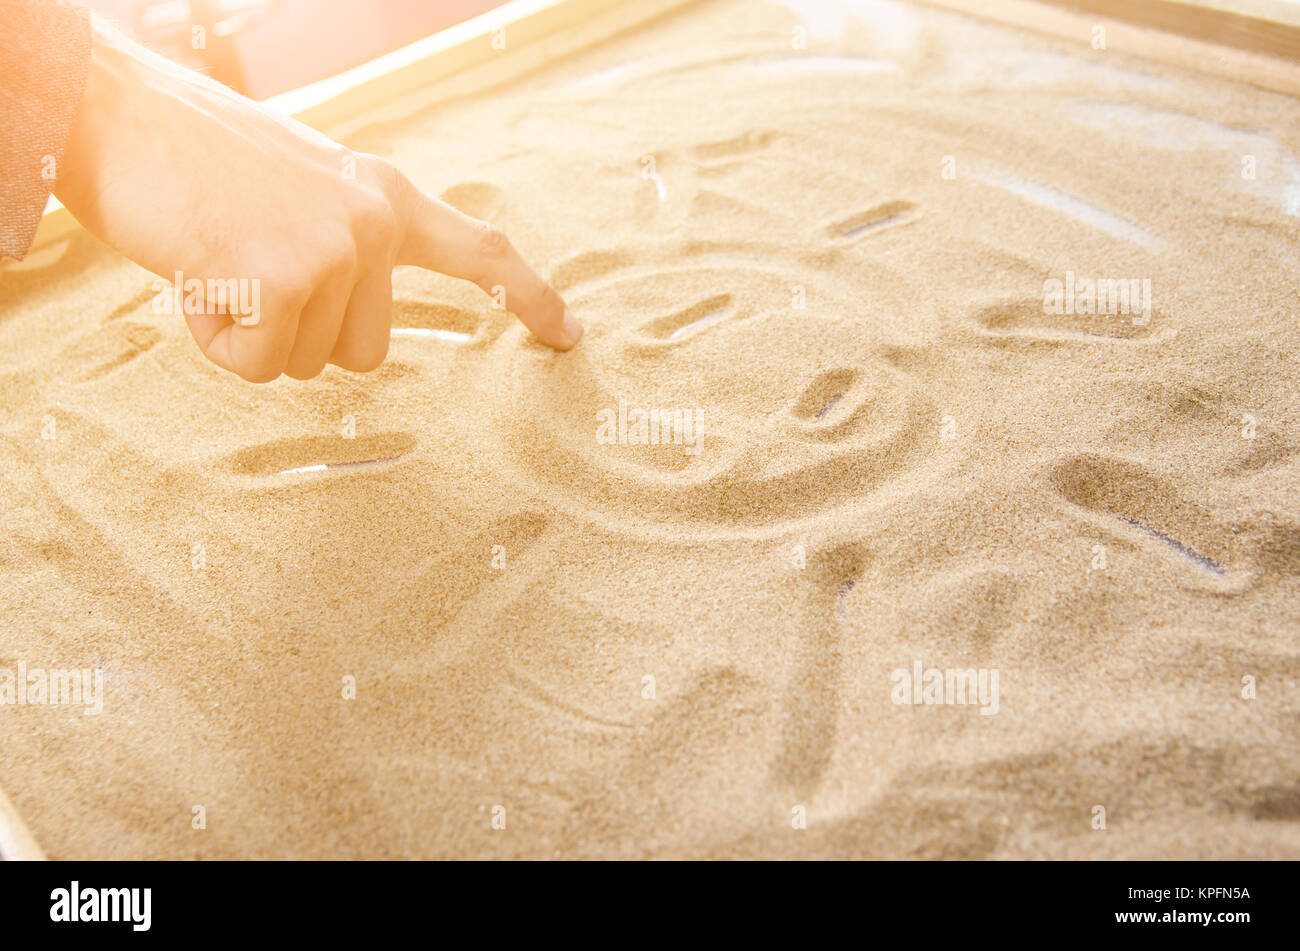 a man draws by his  finger on the sand symbol of the smiling sun. toned. Stock Photo